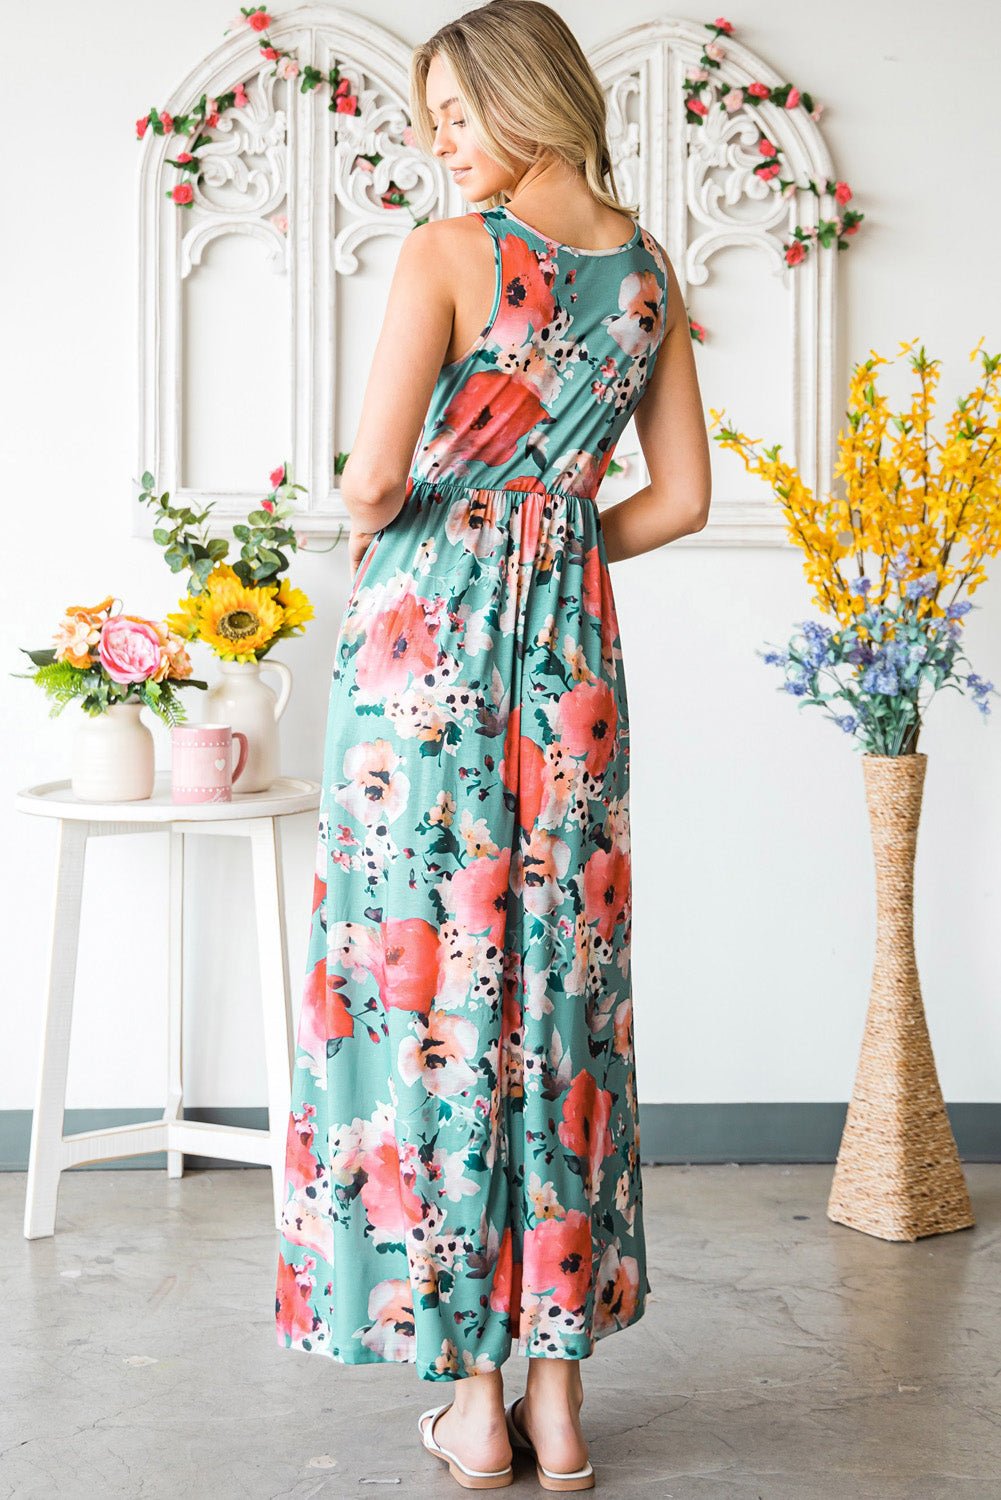 Blossoming Beauty Floral Maxi Dress - Embrace Love's Whimsy and Romance - Soft, Stretchy, and Breathable for All-Day Elegance - Guy Christopher